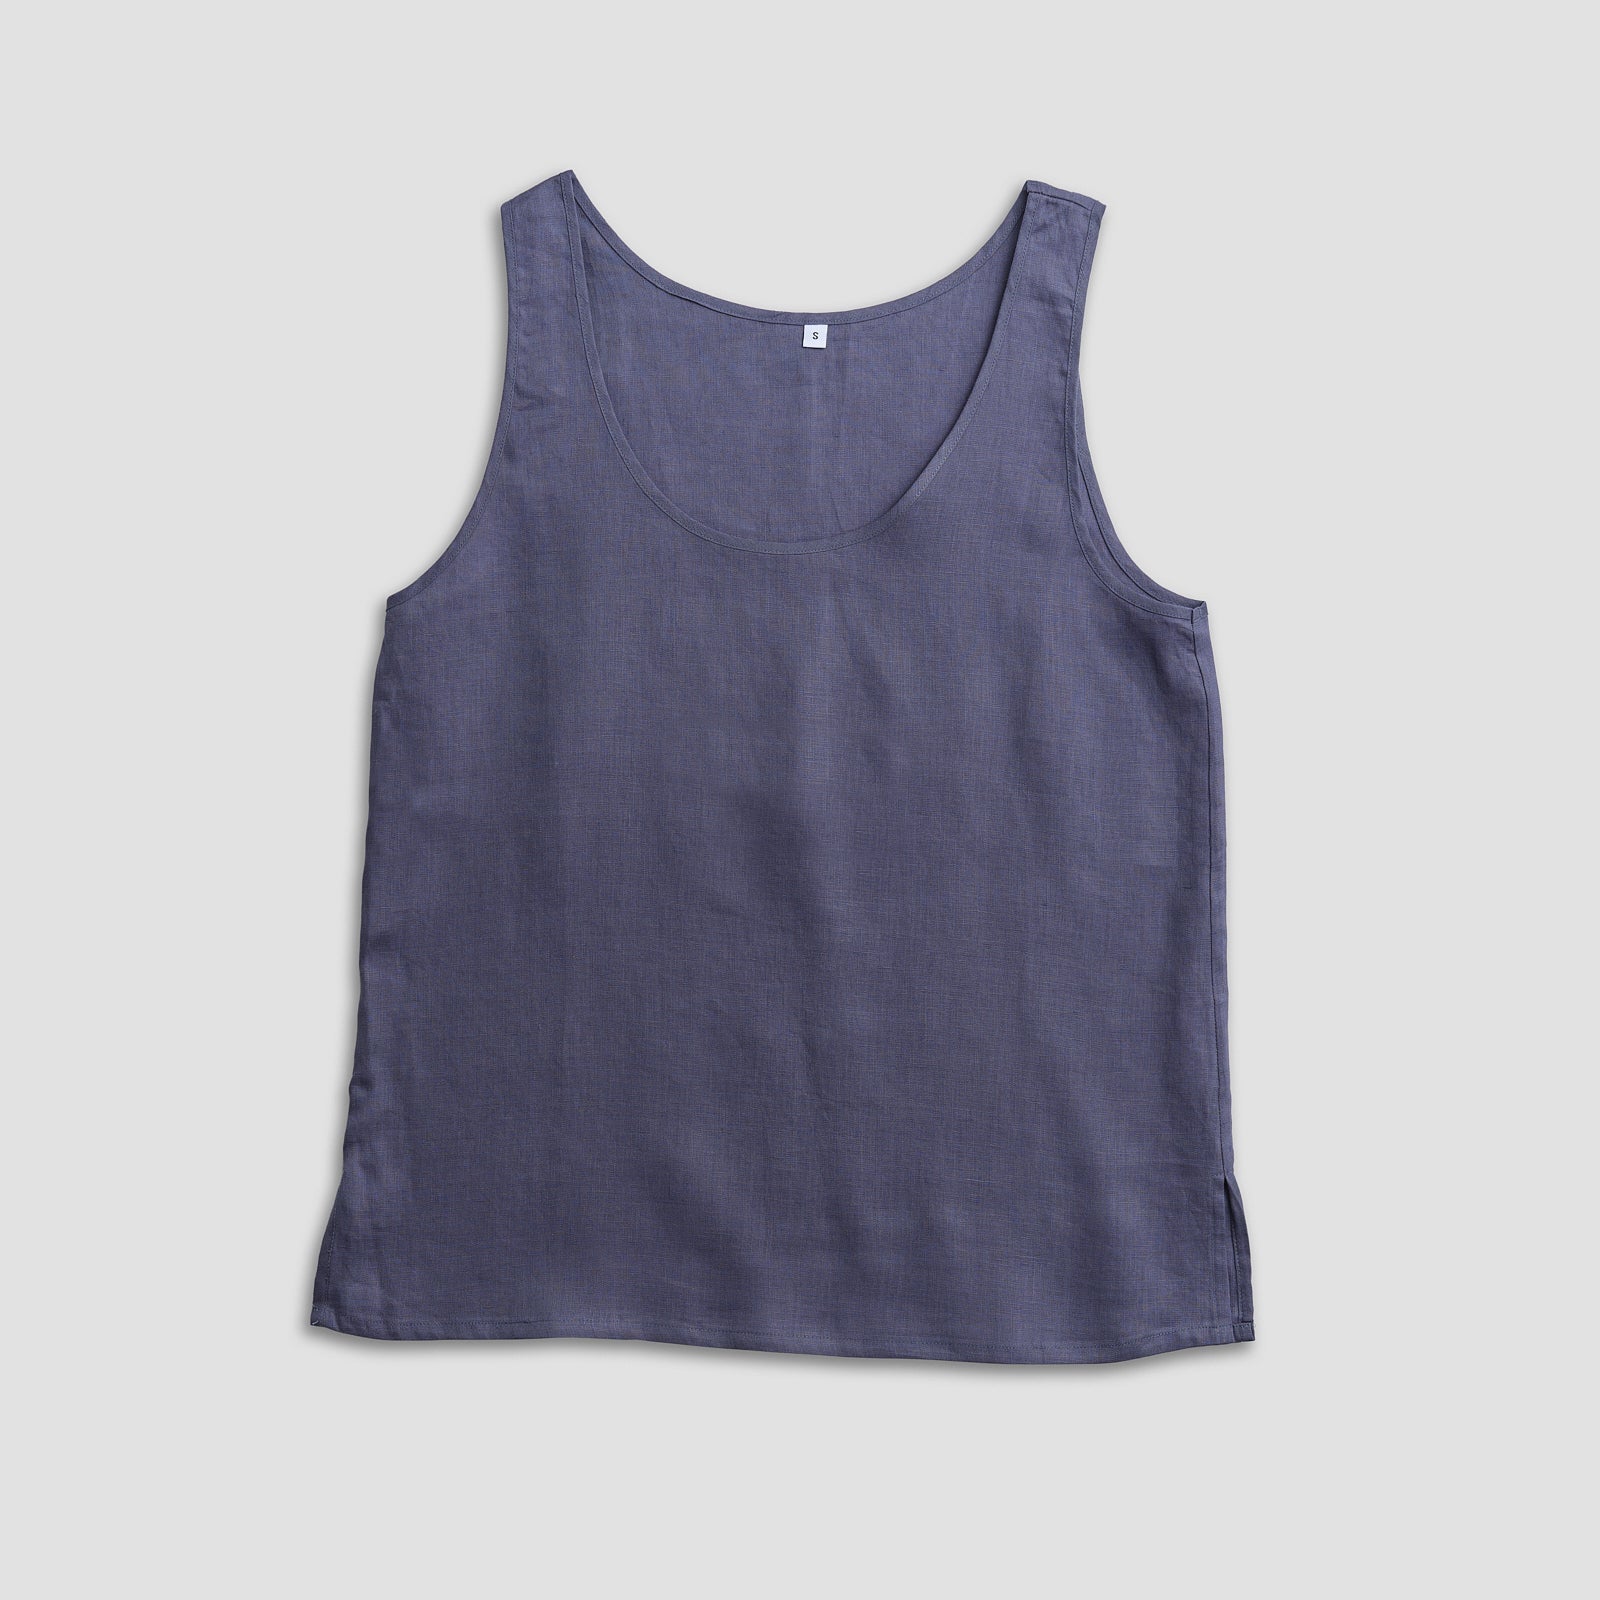 Blueberry Linen Cami Top - Piglet in Bed